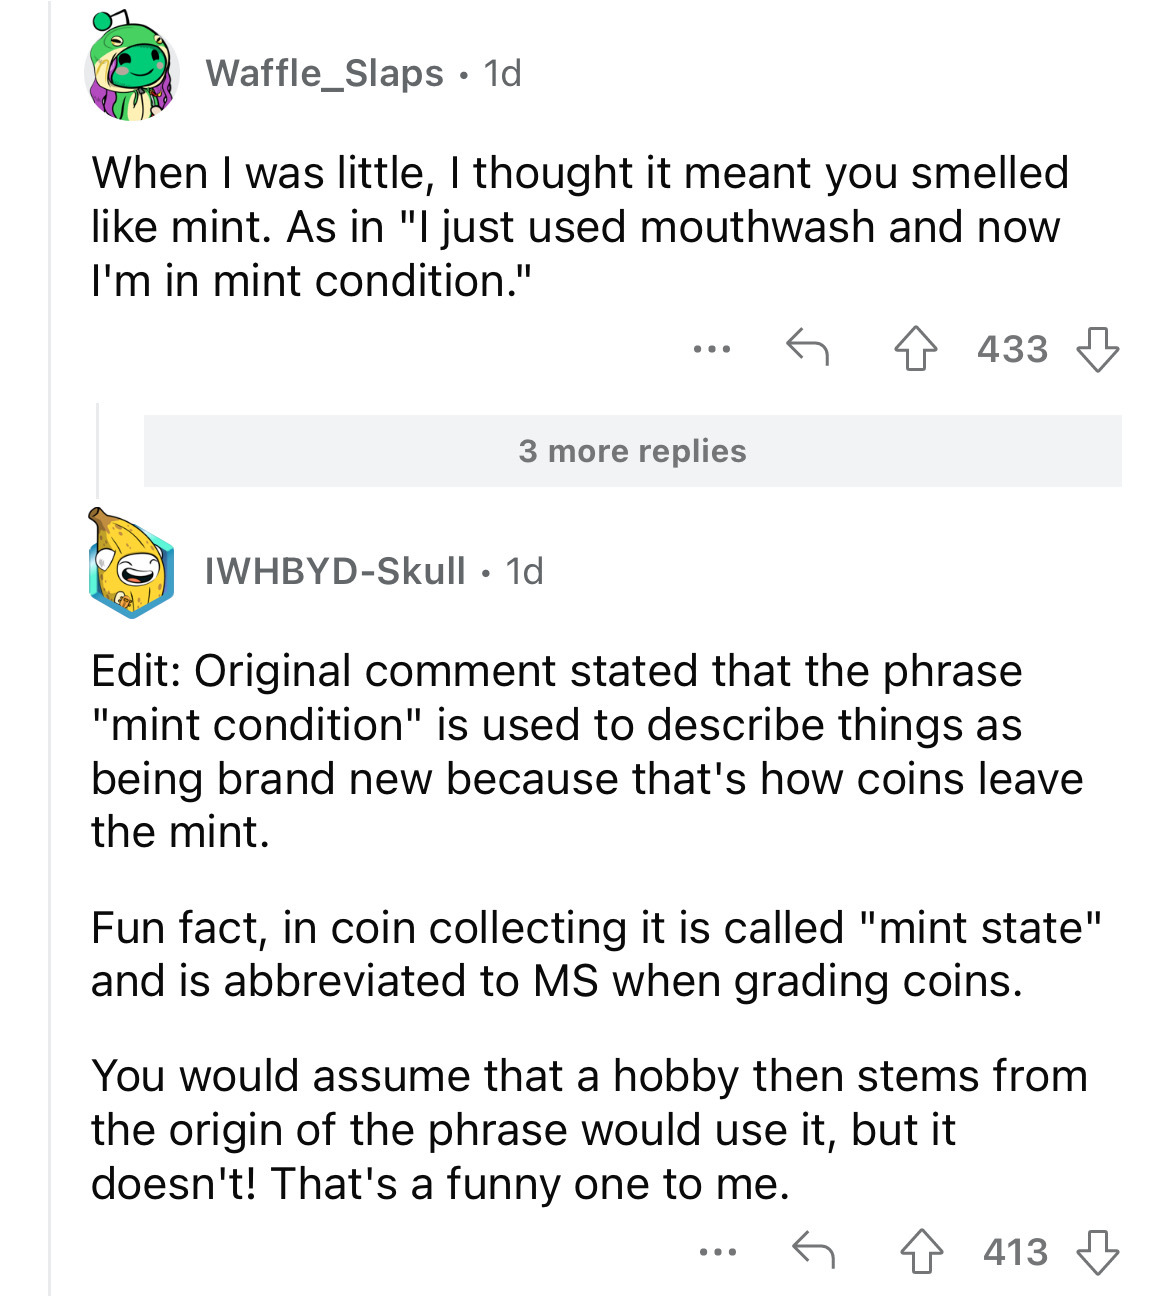 poem about video games easy - Waffle_Slaps. 1d When I was little, I thought it meant you smelled mint. As in "I just used mouthwash and now I'm in mint condition." 4 433 3 more replies IwhbydSkull . 1d Edit Original comment stated that the phrase "mint co